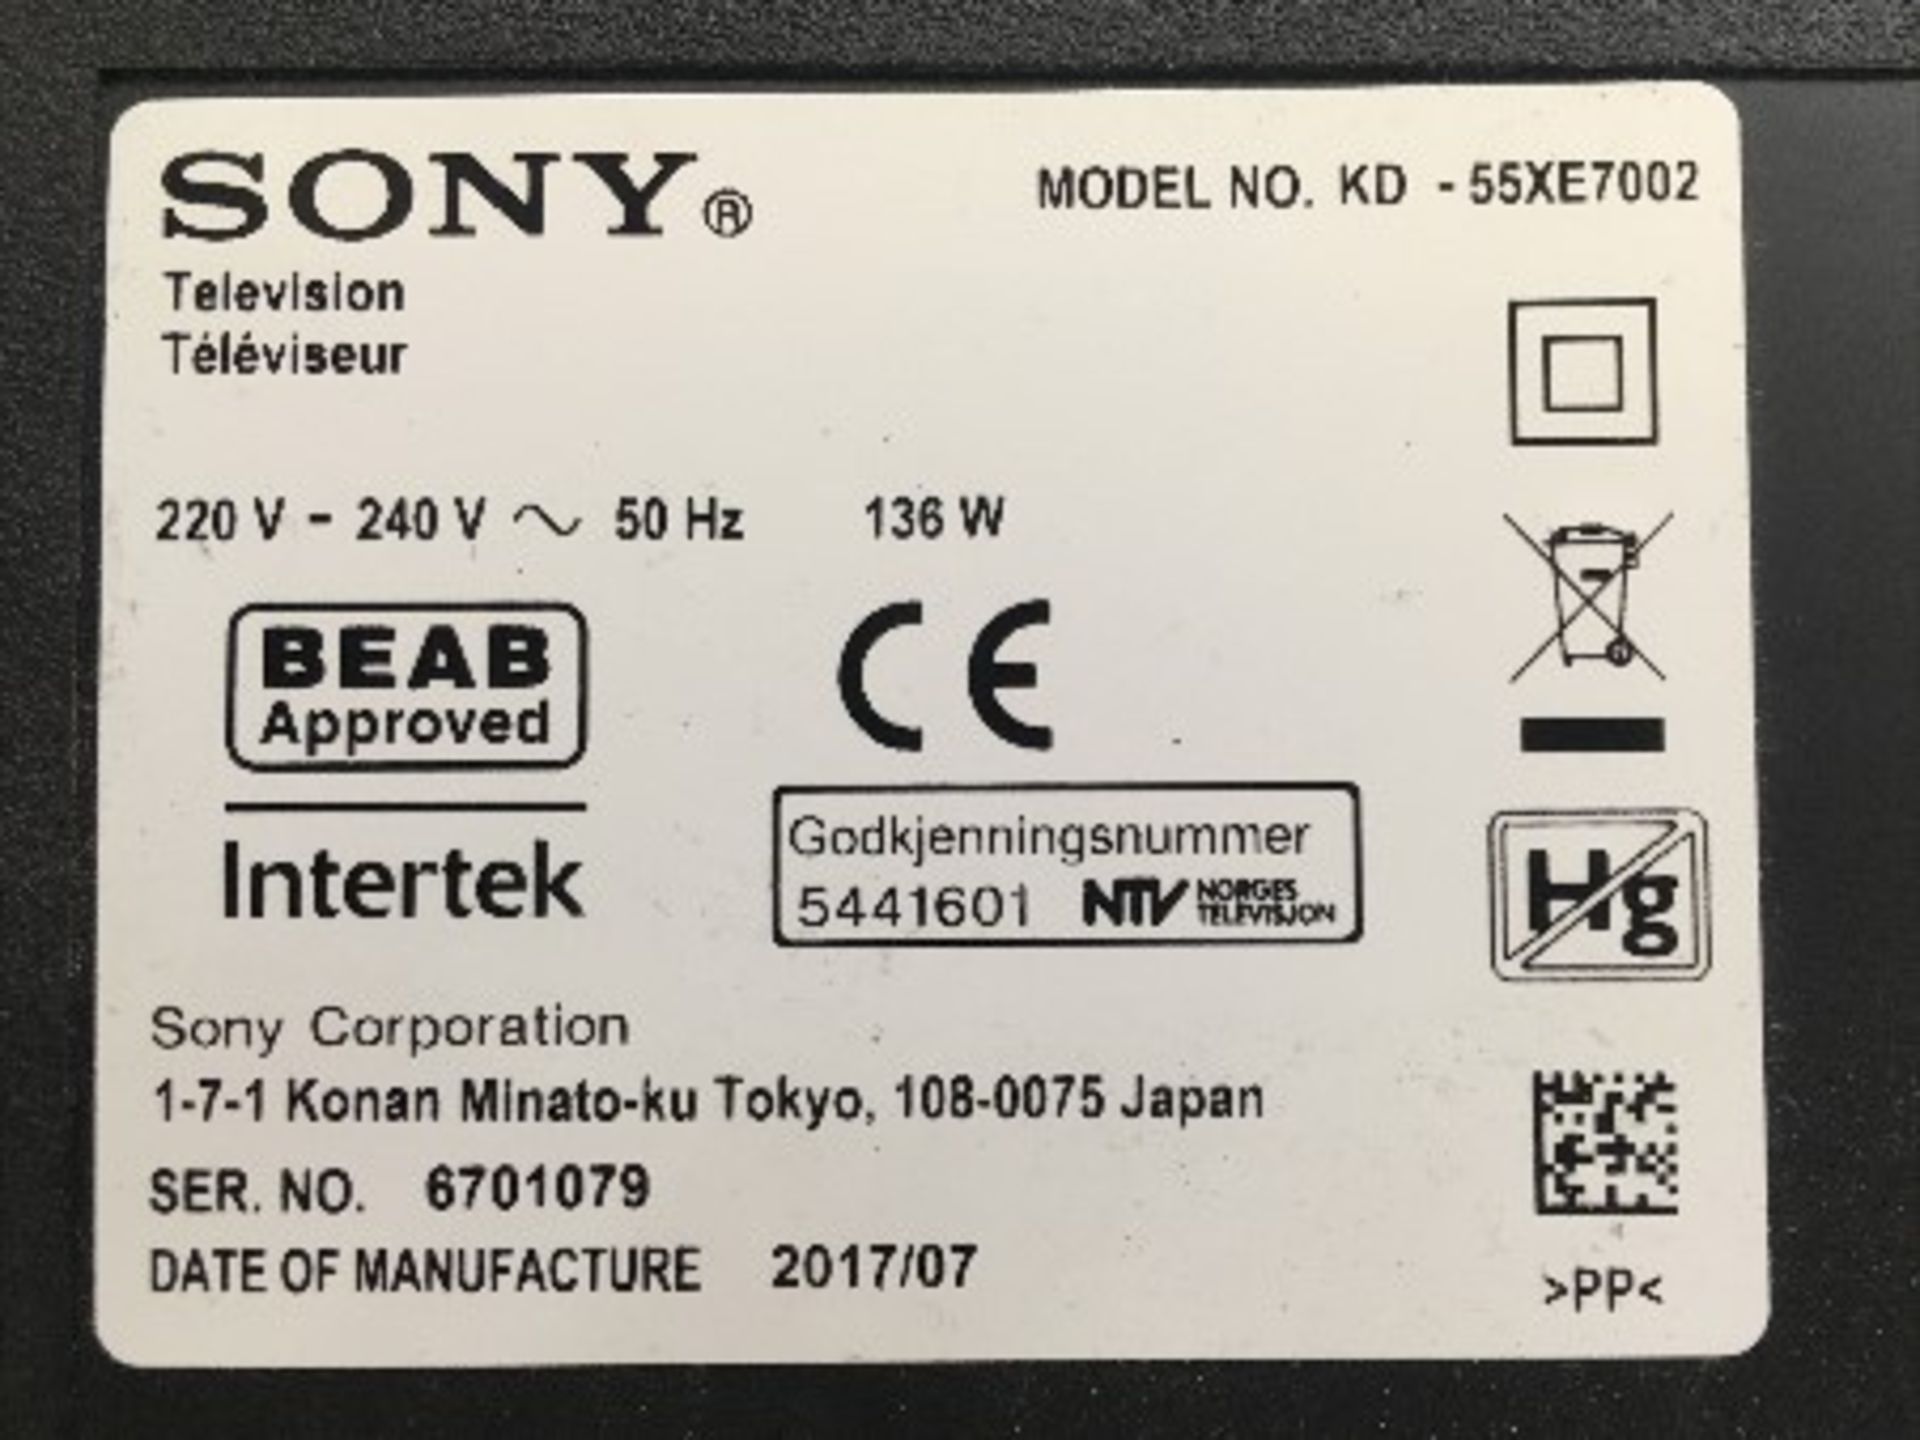 Sony Bravia KD55XE7002 55" 4K HDR Smart Television - Image 3 of 3